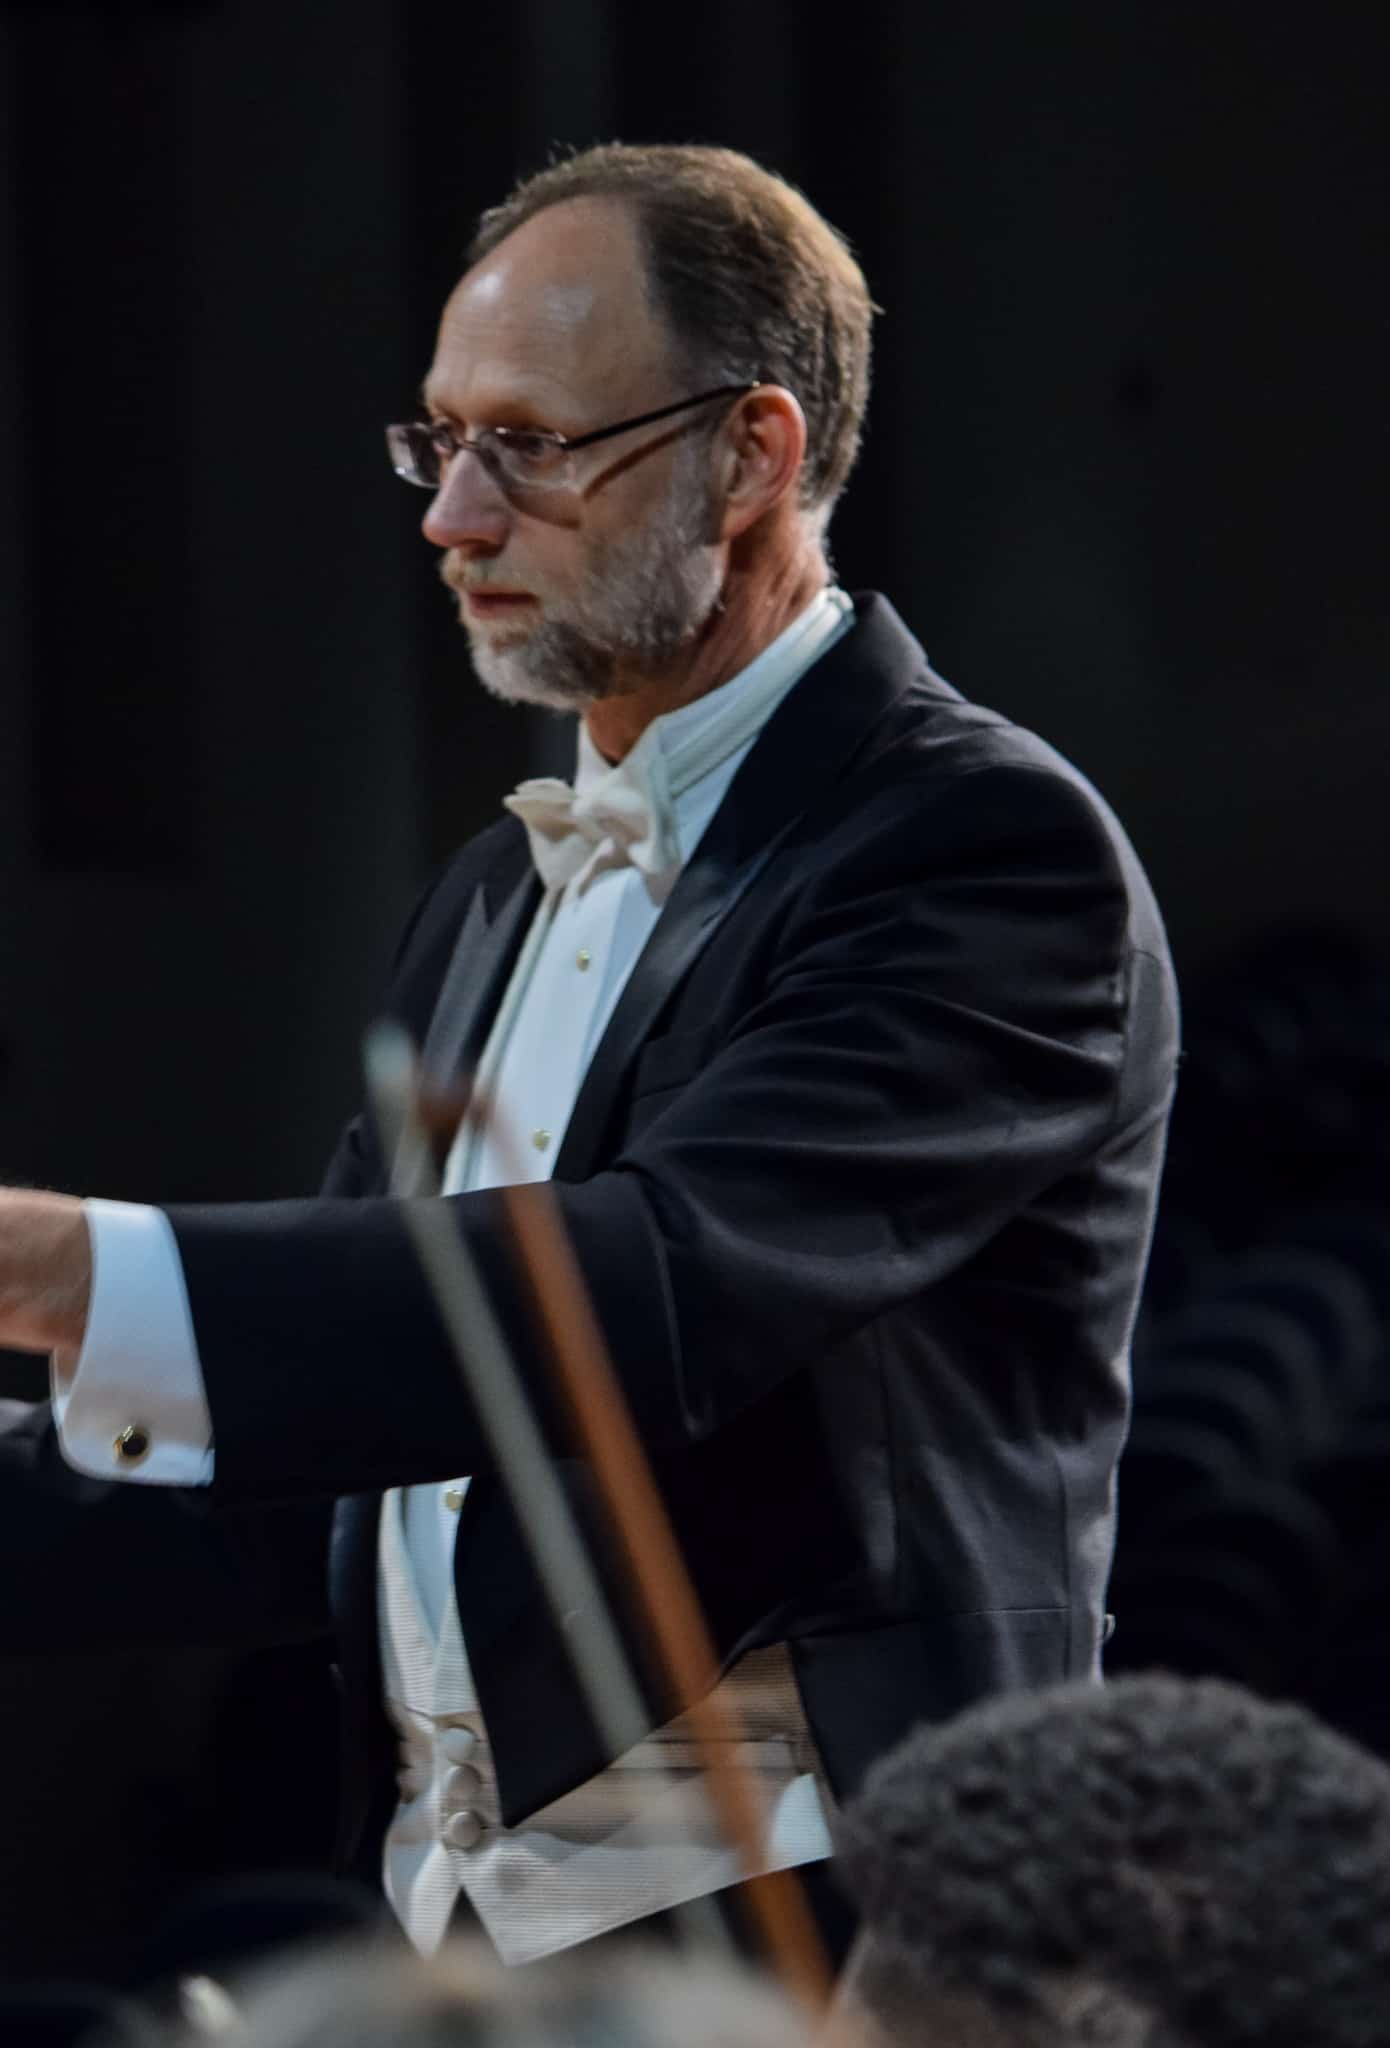 Conductor Michael Weaver shows his focus as he makes sure the orchestra stays in time.